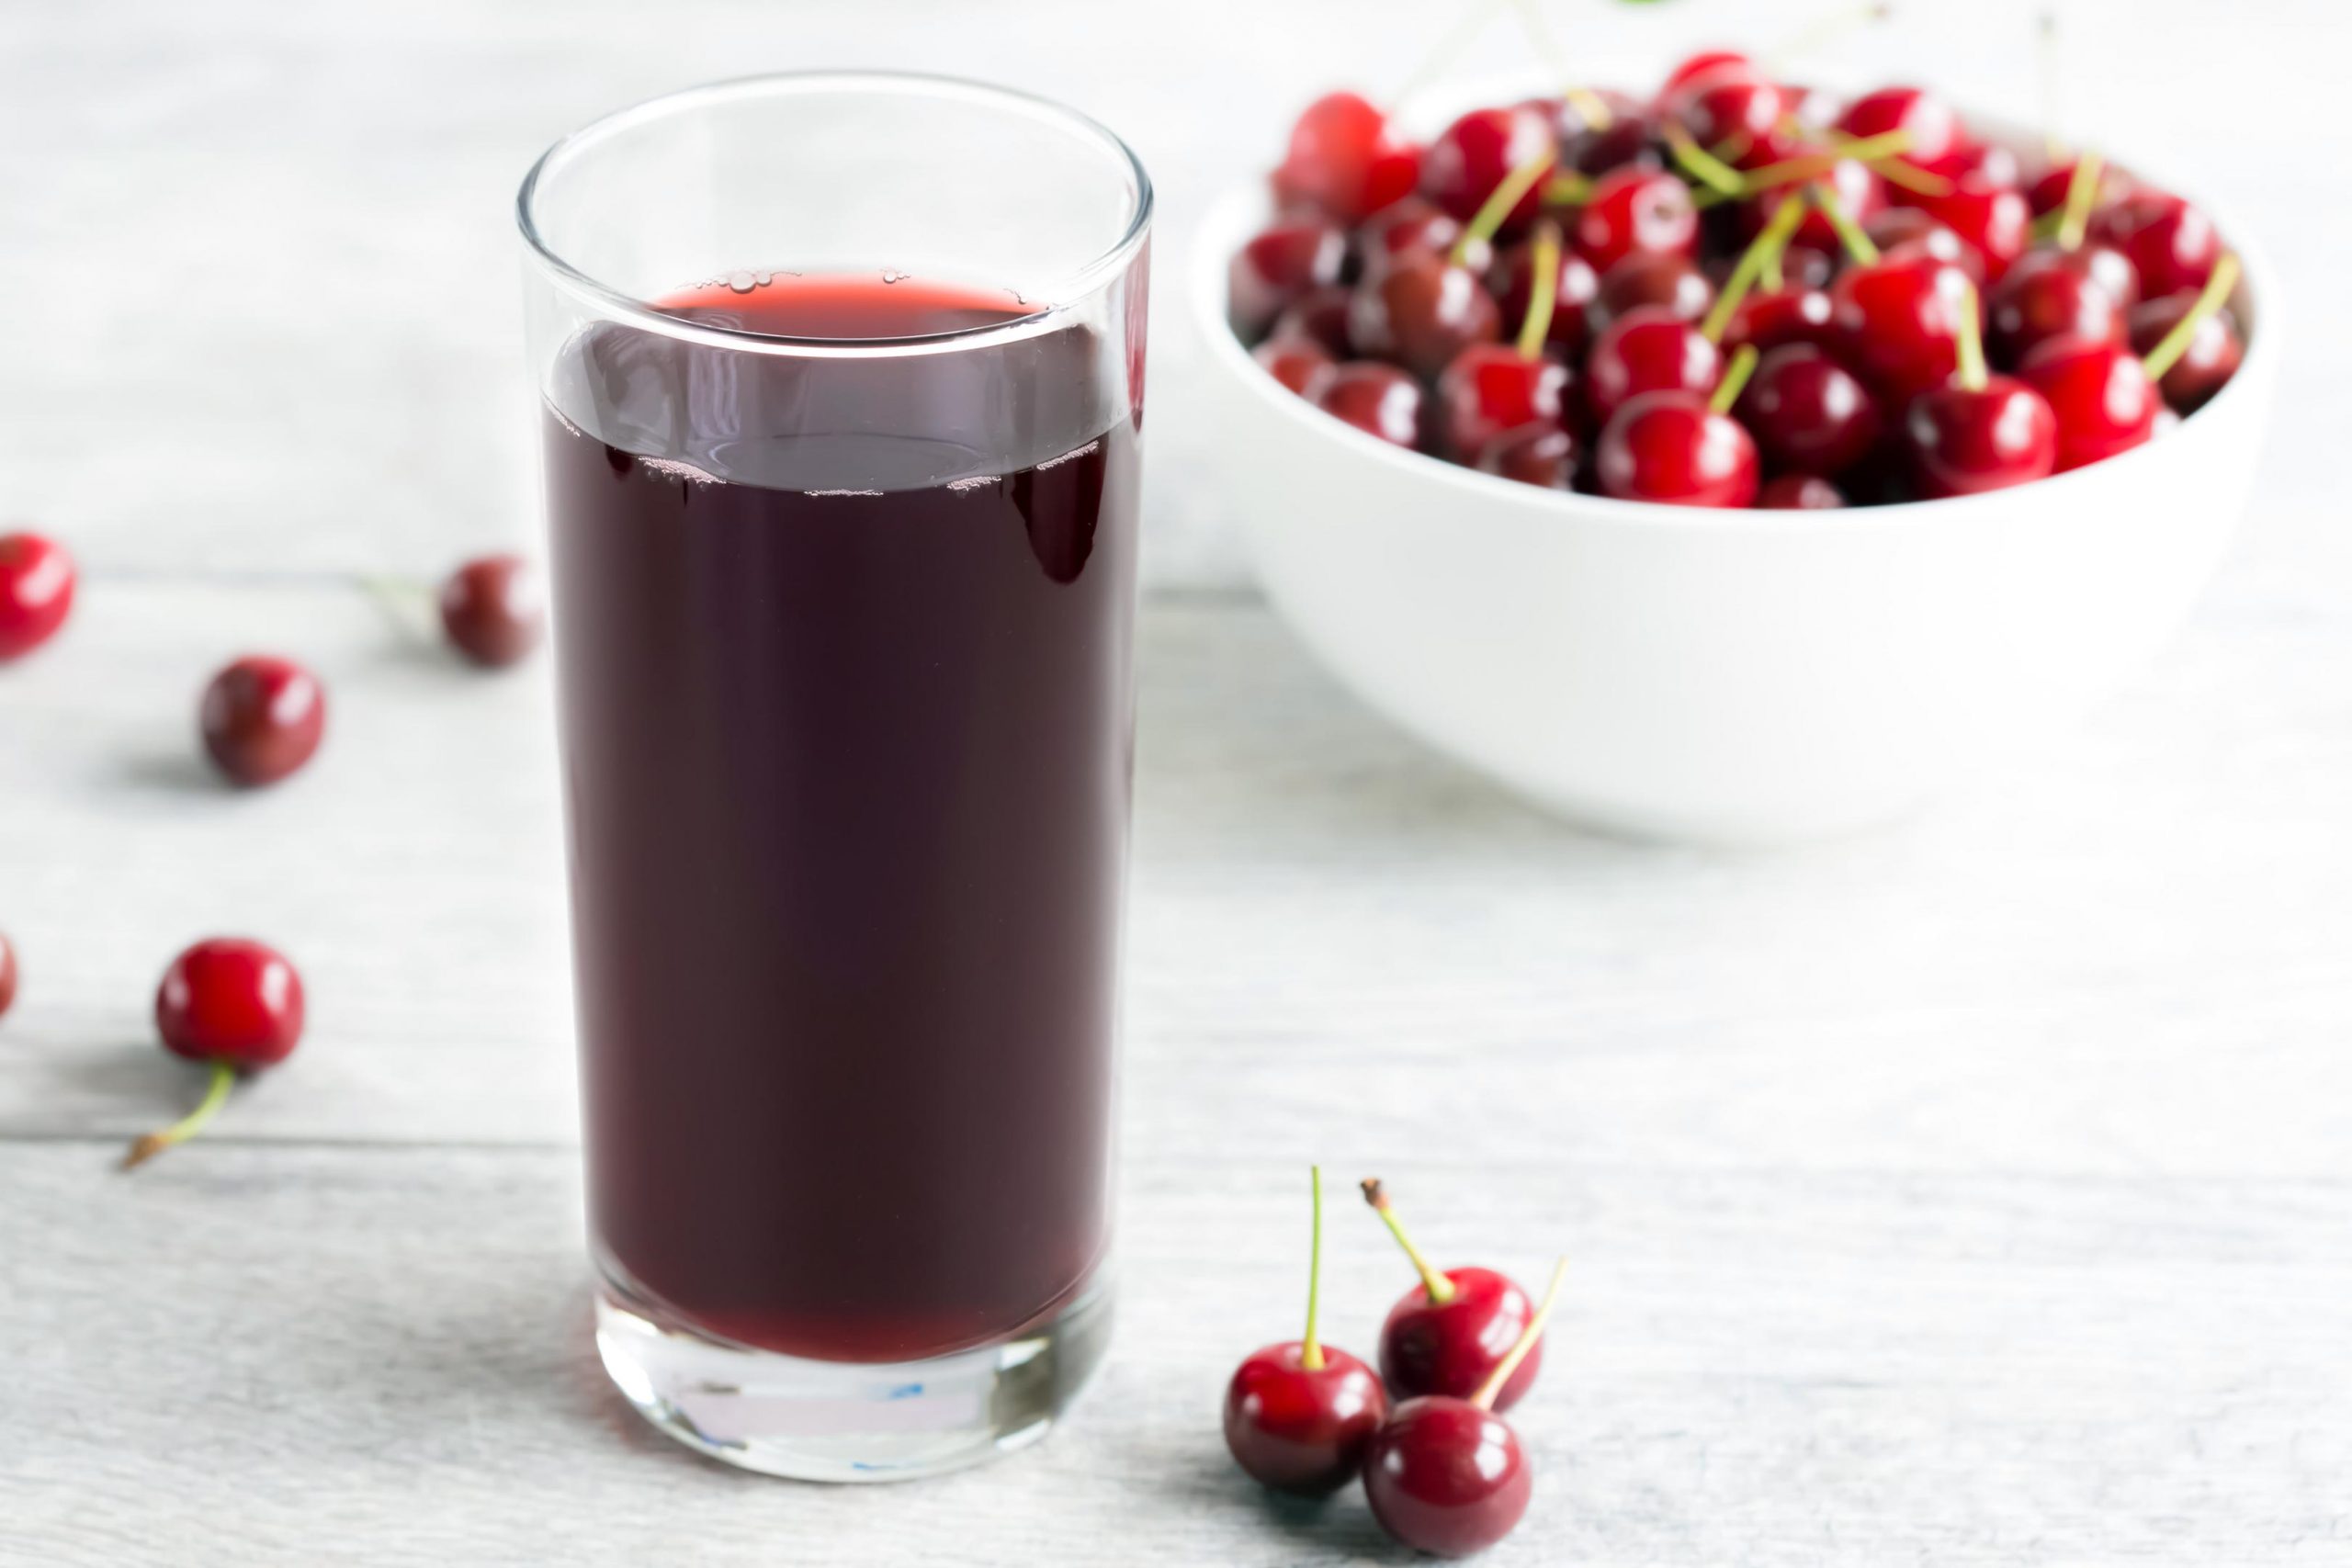 Simple Tart Cherry Juice After Workout for Push Pull Legs